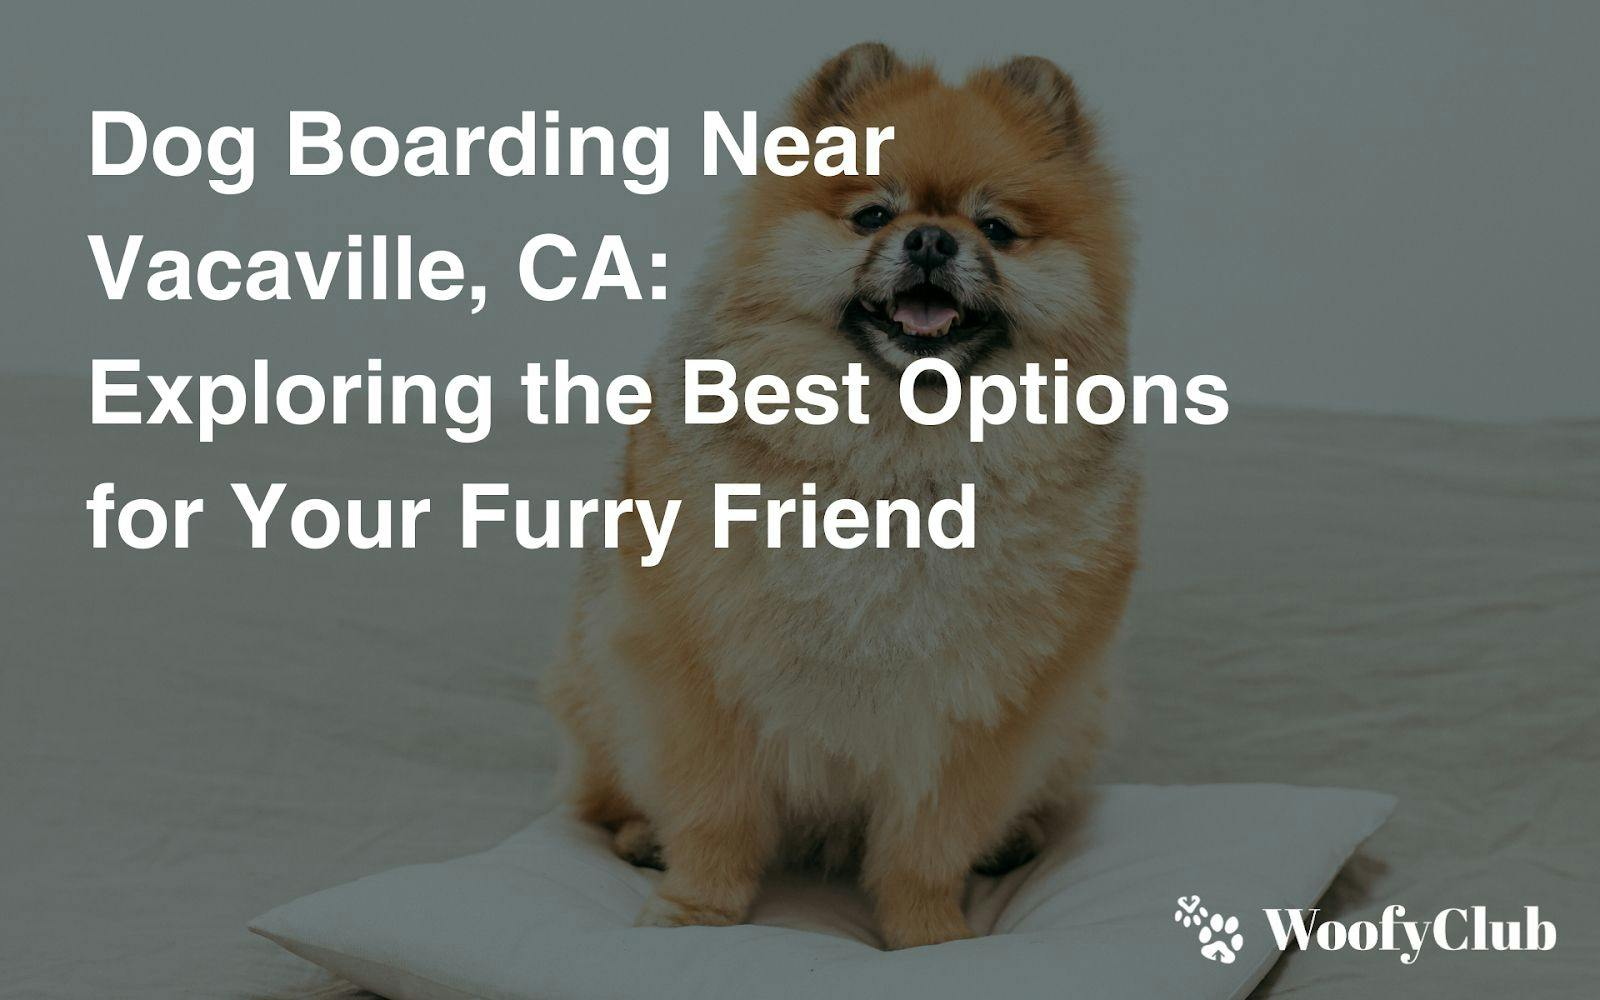 Dog Boarding Near Vacaville, CA: Exploring The Best Options For Your Furry Friend